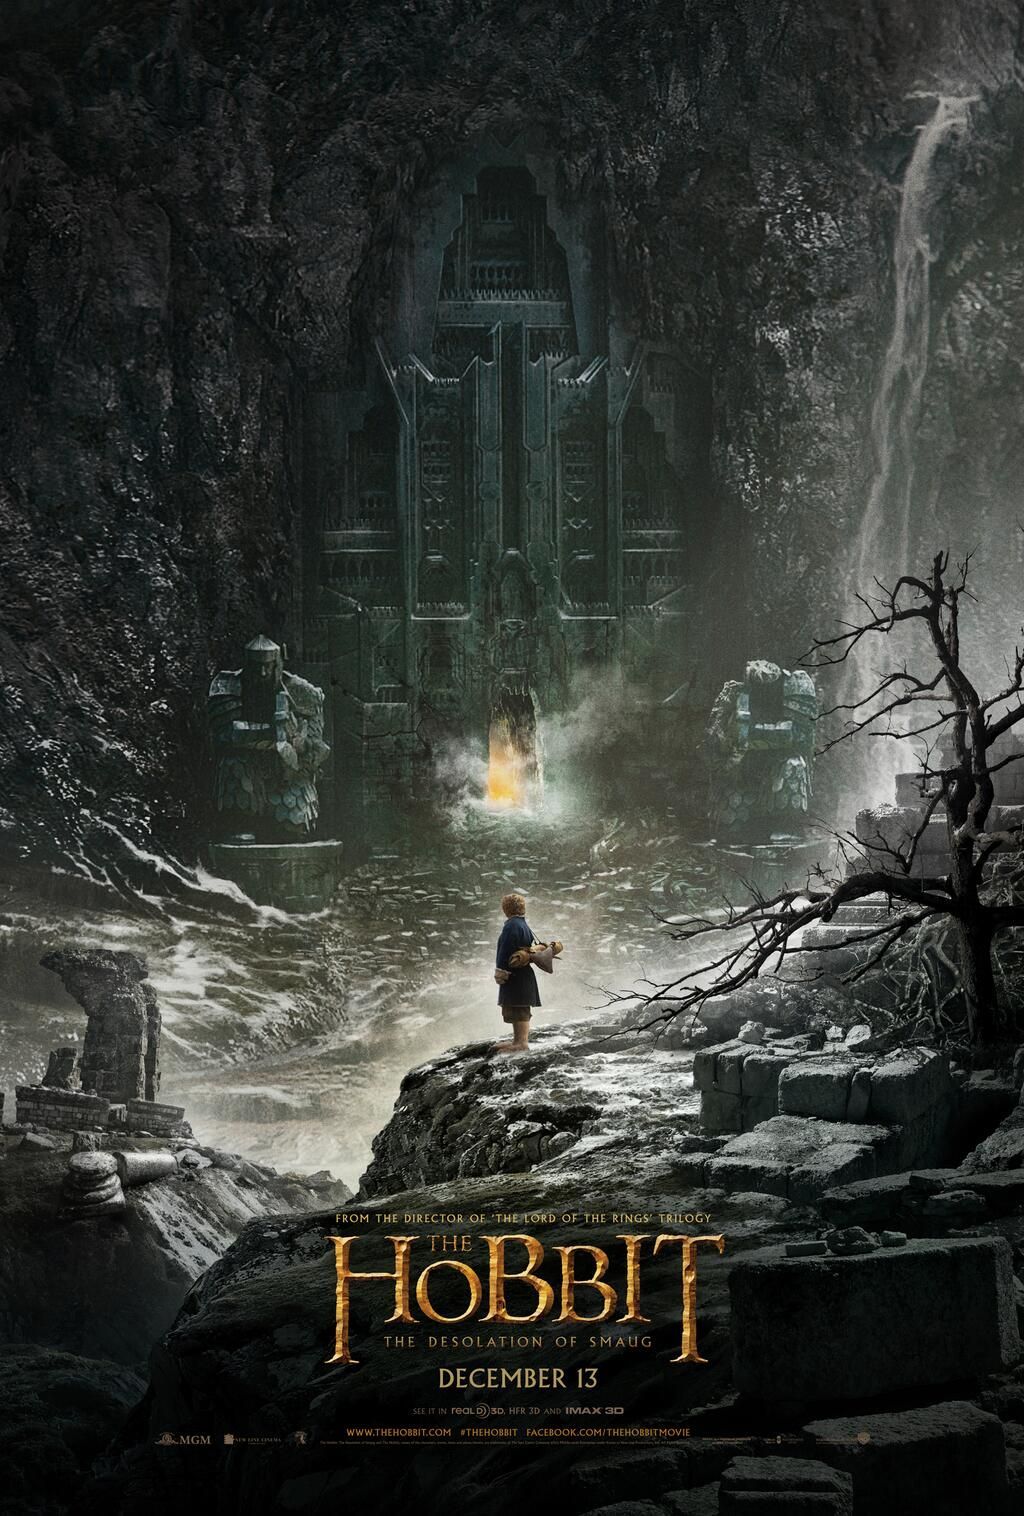 The Hobbit The Desolation of Smaug Trailer [Plus New Images]